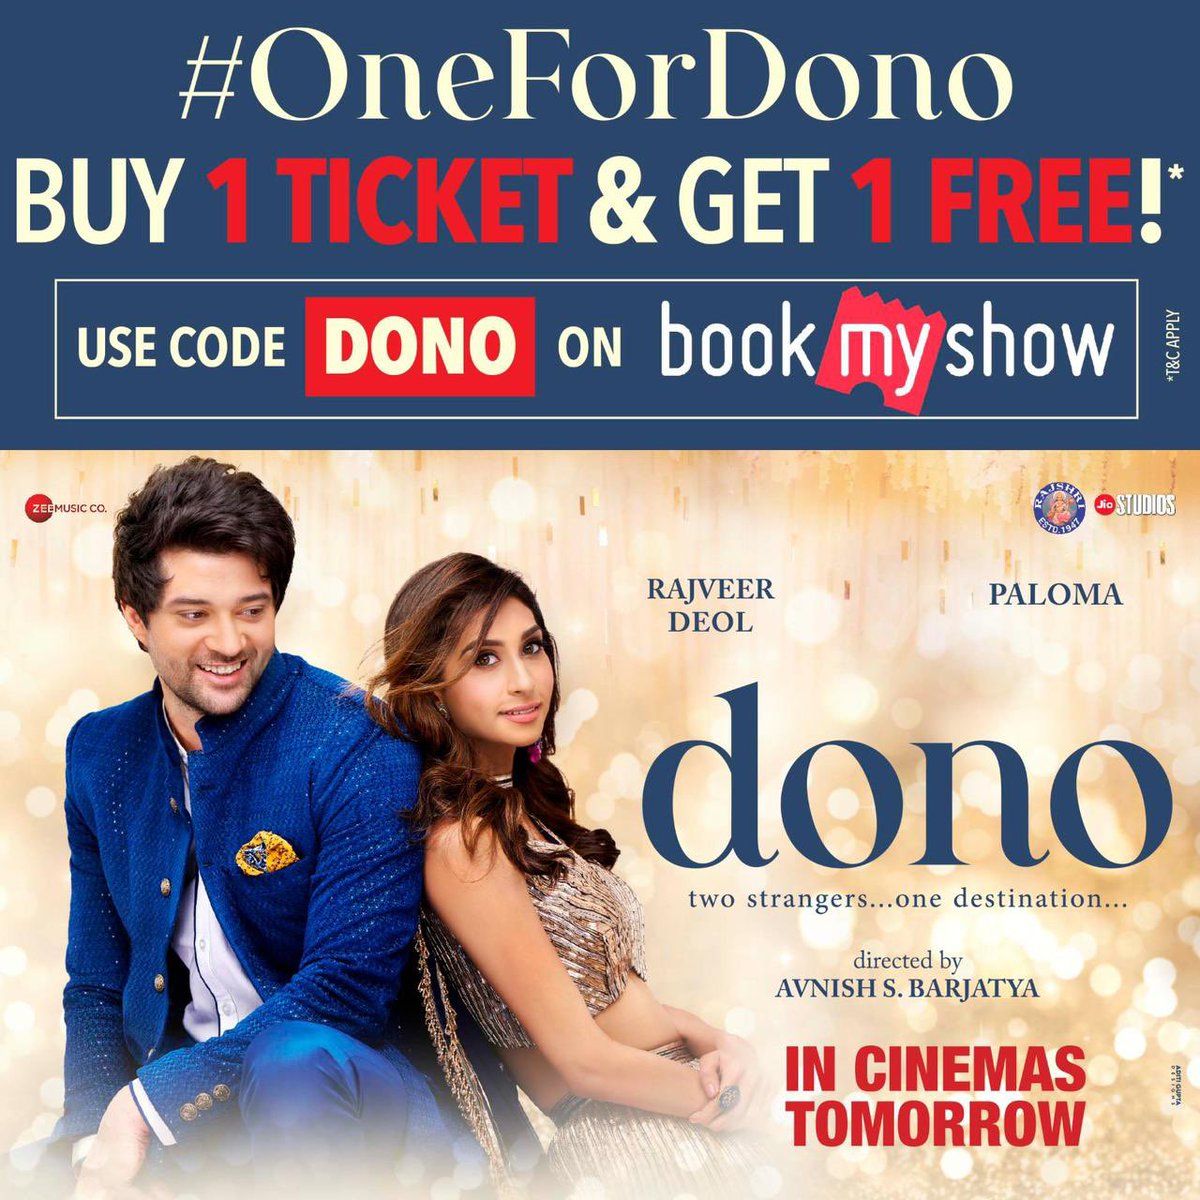 ‘DONO’ BUY-1-GET-1 TICKET FREE OFFER… #Rajshri and #JioStudios - the makers of #Dono - live up to its theme of ‘tum aur main dono’… Offer Buy-1-Get-1 free ticket.

#Dono marks the debut of actors #RajveerDeol and #Paloma and director #AvnishSBarjatya… In *cinemas* [Thursday] 5…